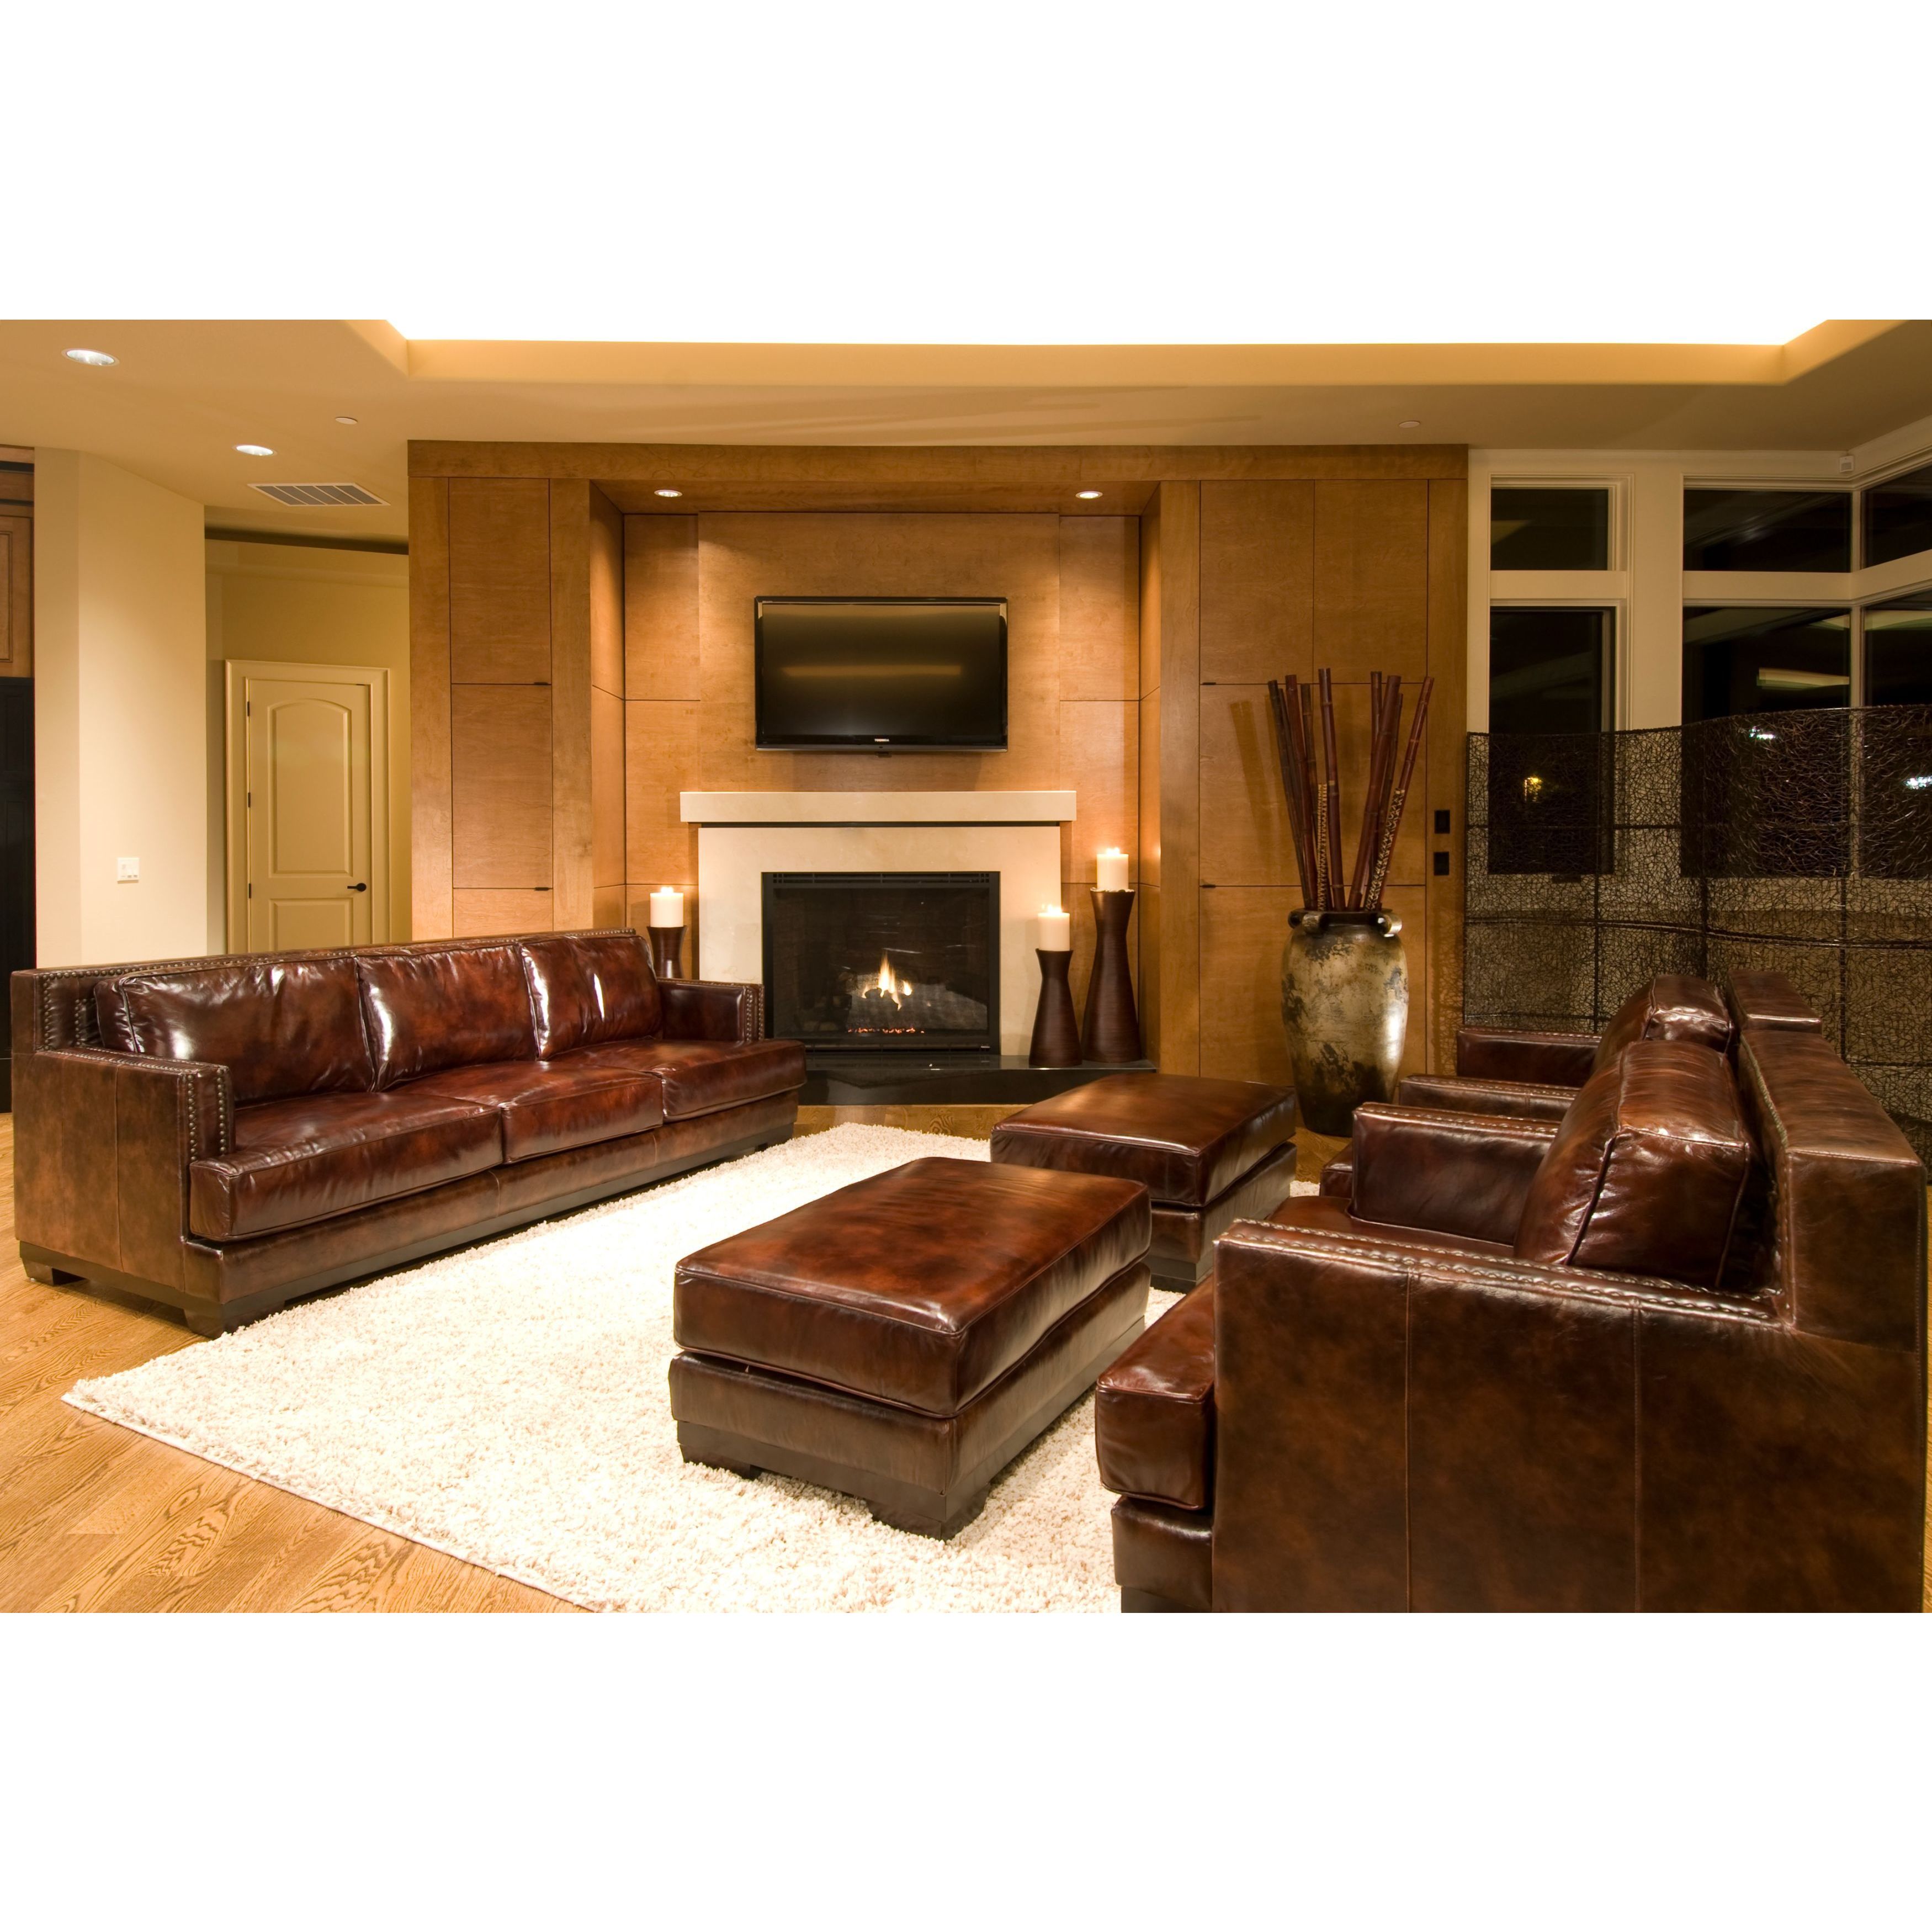 Featured image of post 5 Piece Living Room Furniture Sets Cheap - 2020 popular 1 trends in furniture, home &amp; garden, toys &amp; hobbies with couch set living room furniture and 1.